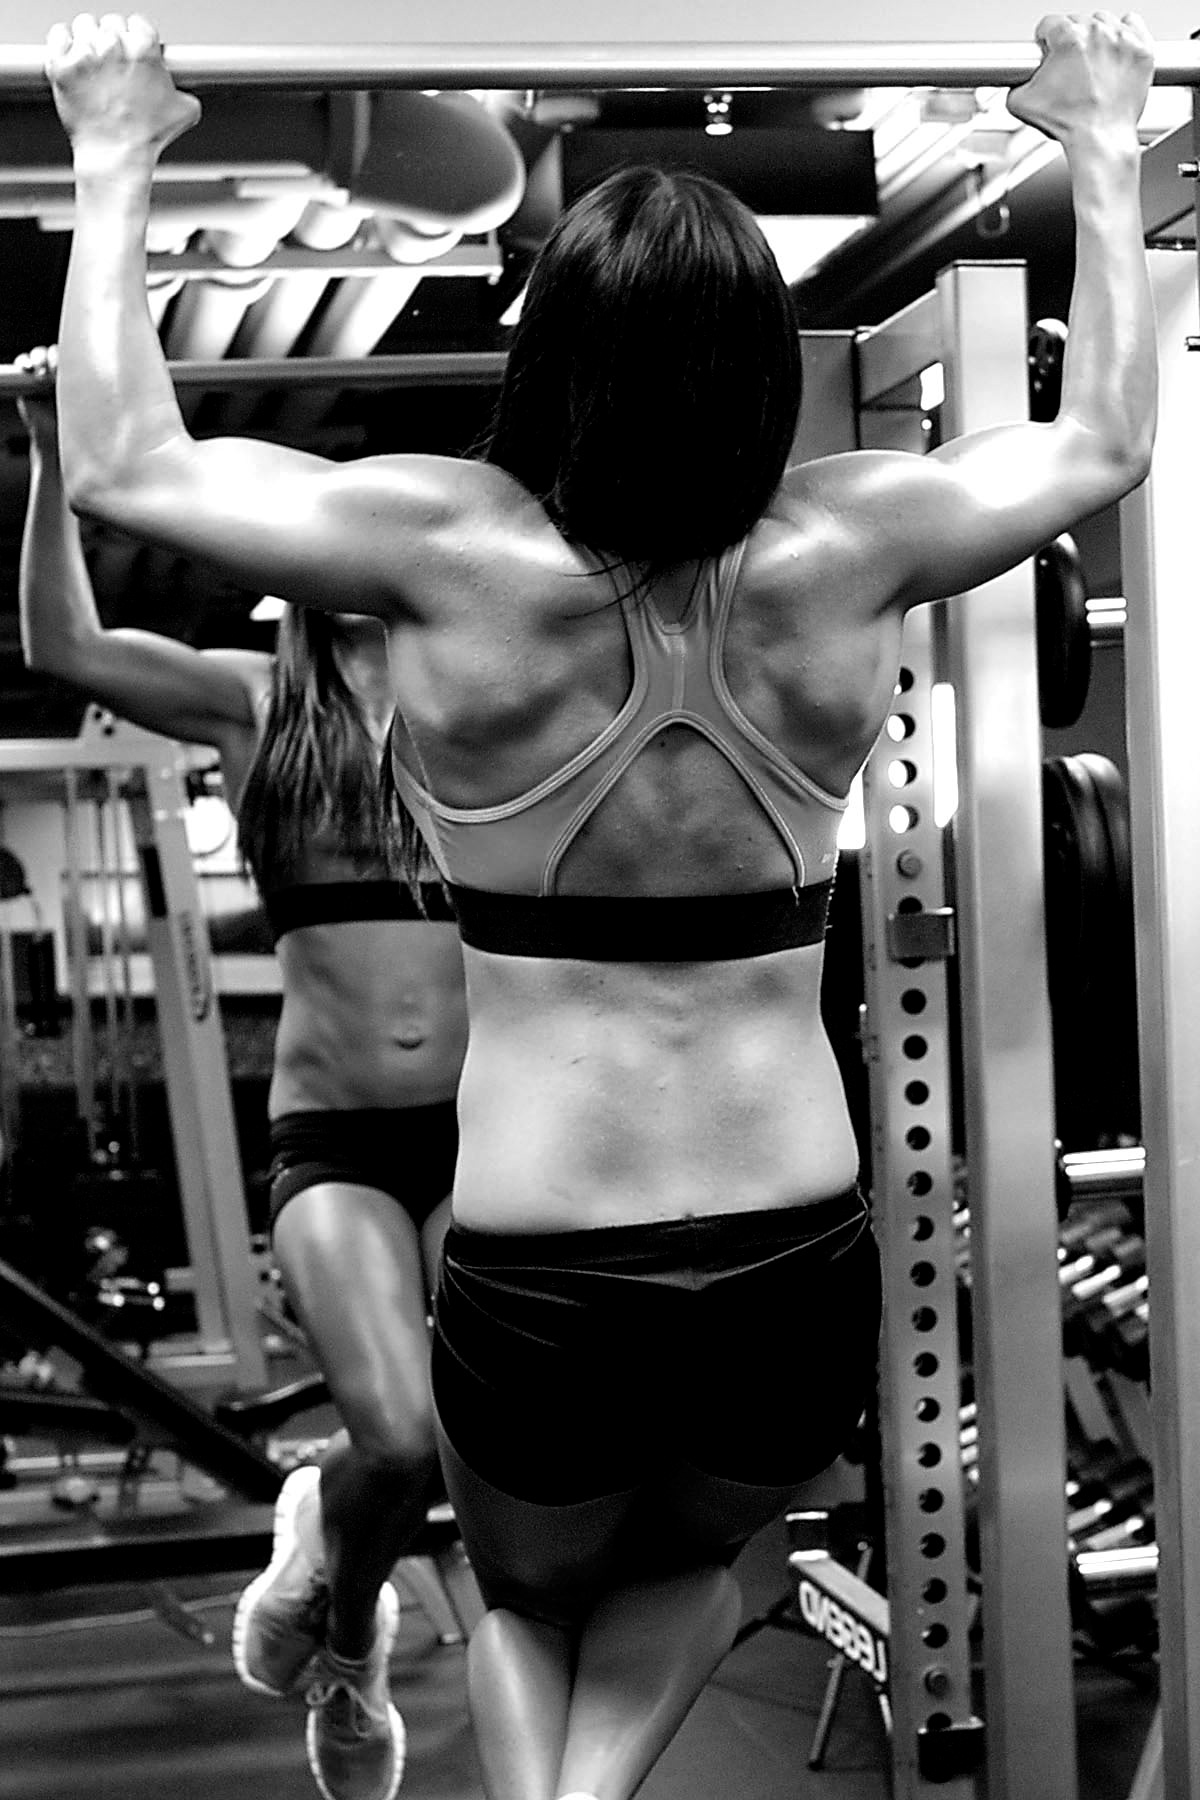 Health fitness workout photo shoot black and white beauty Hot hardwork dedication Canon